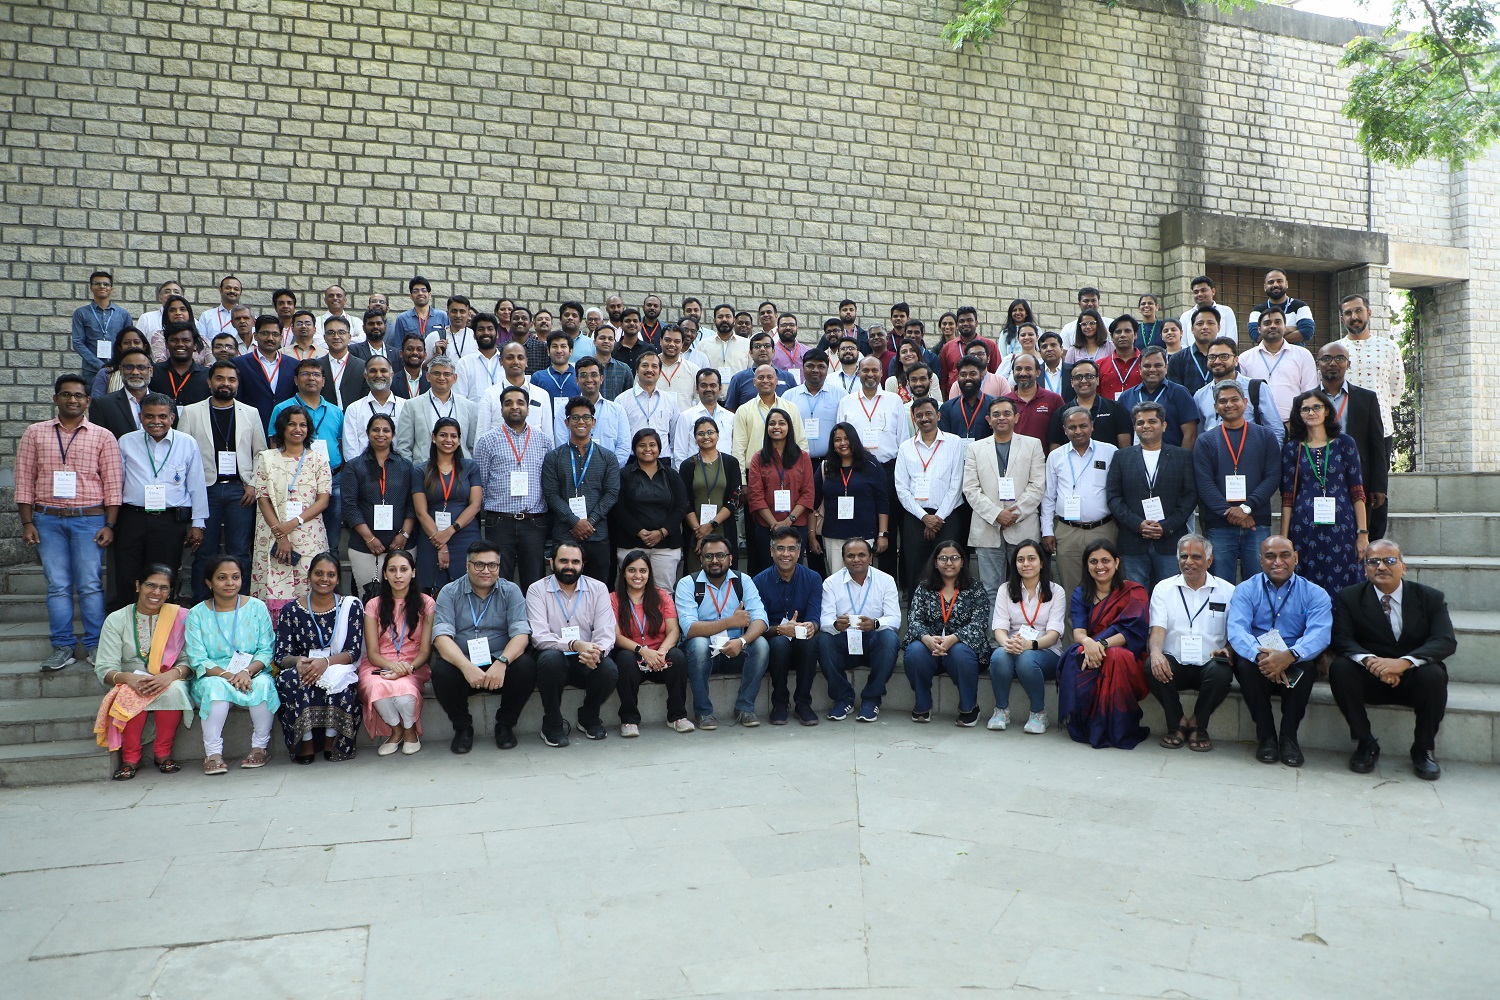 A snapshot of the speakers and participants of the conference.